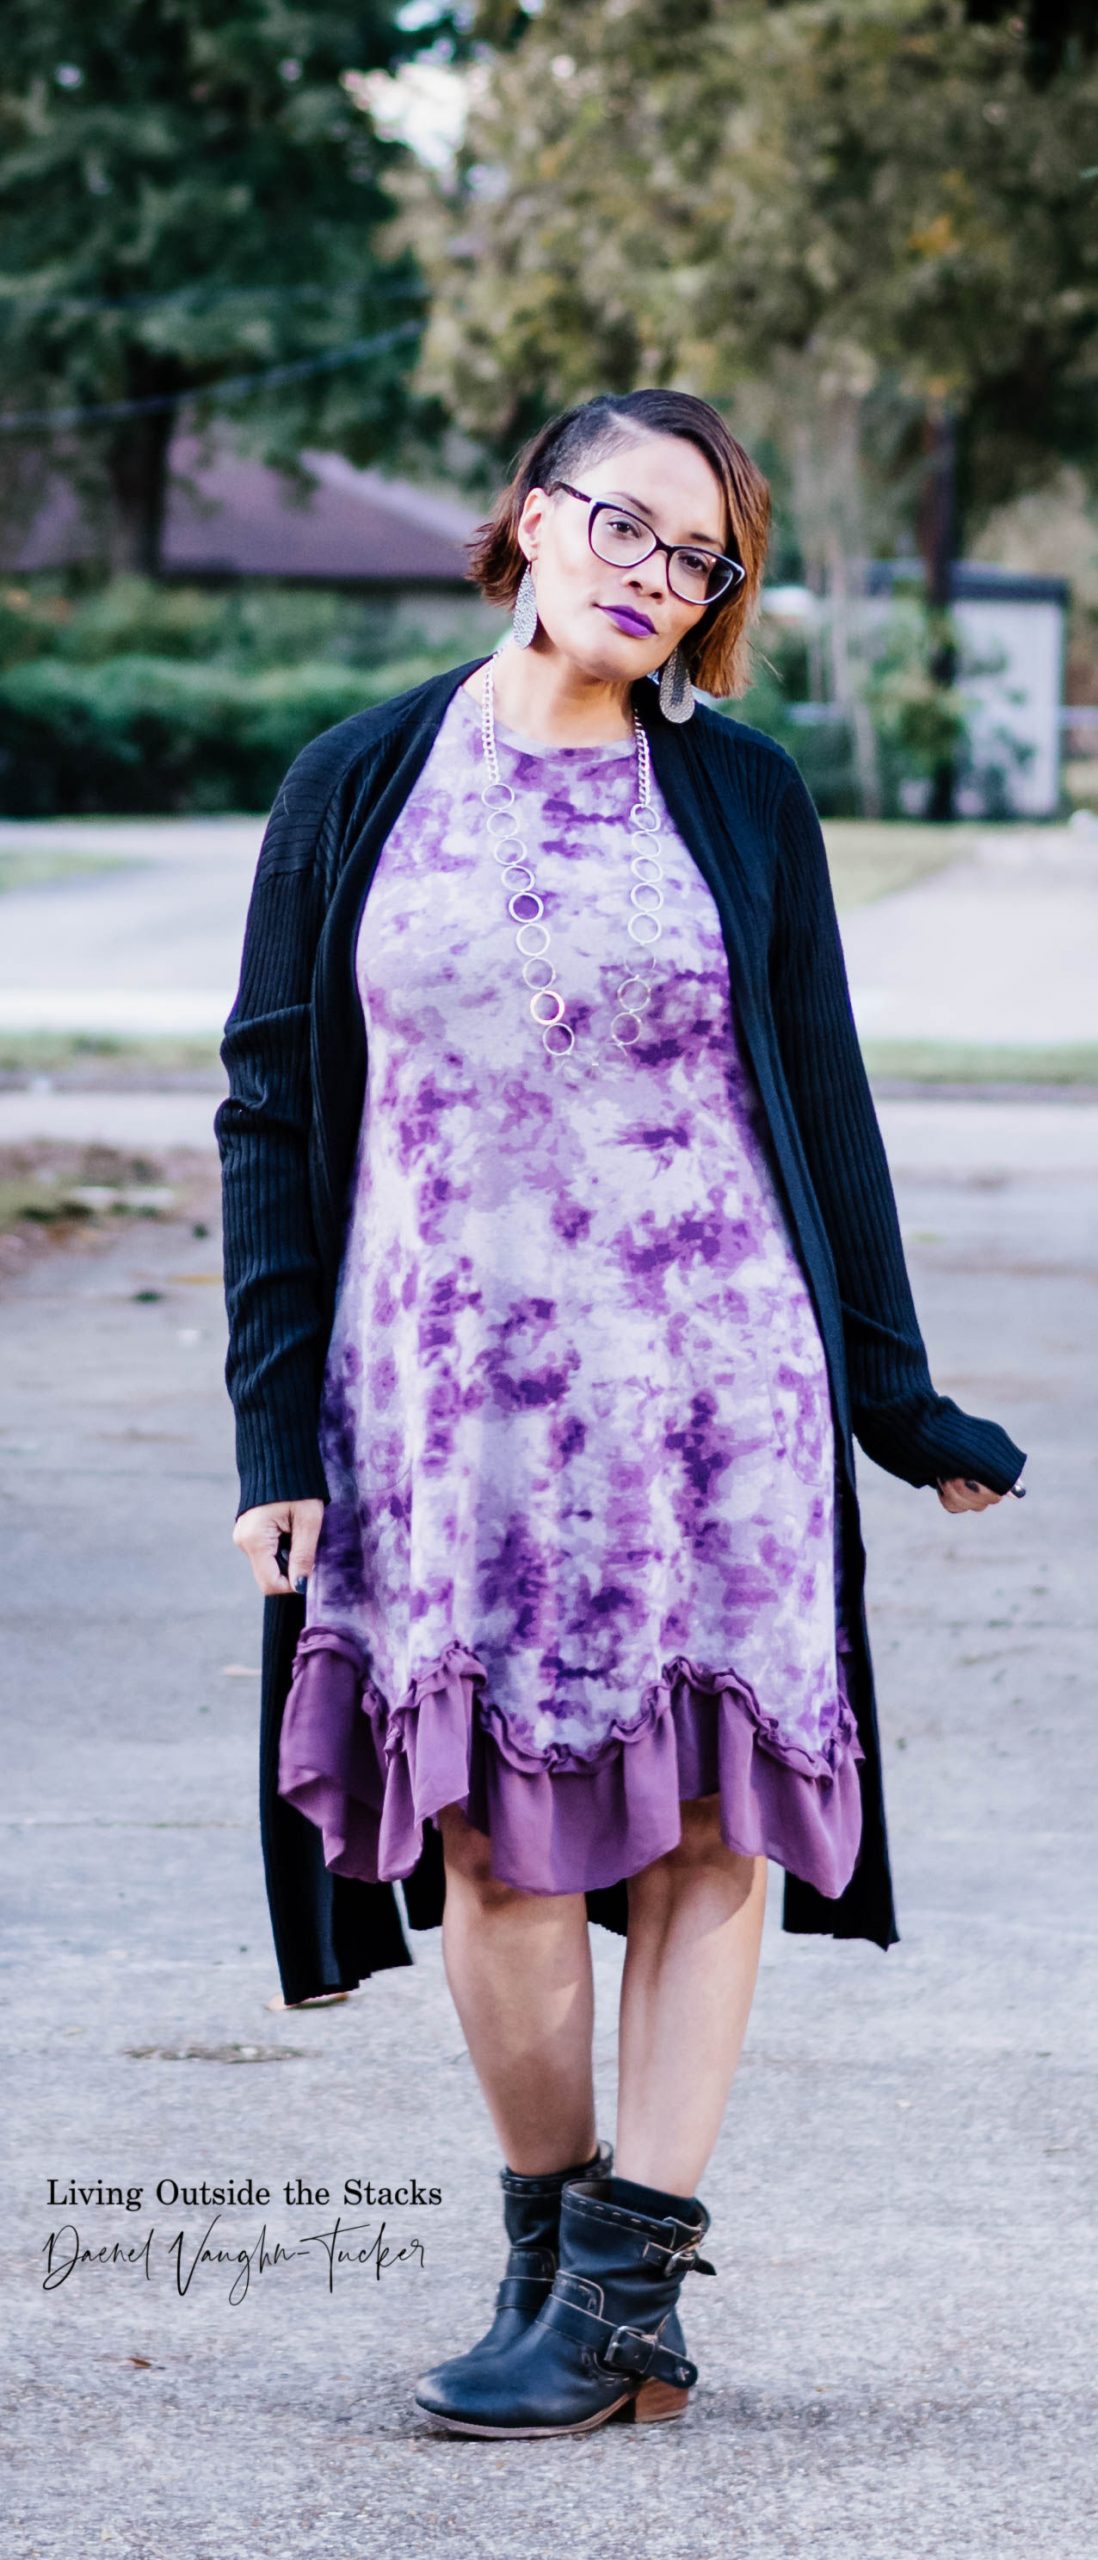 Daenel T {living outside the stacks} Purple Logo Dress and Black Ankle Boots